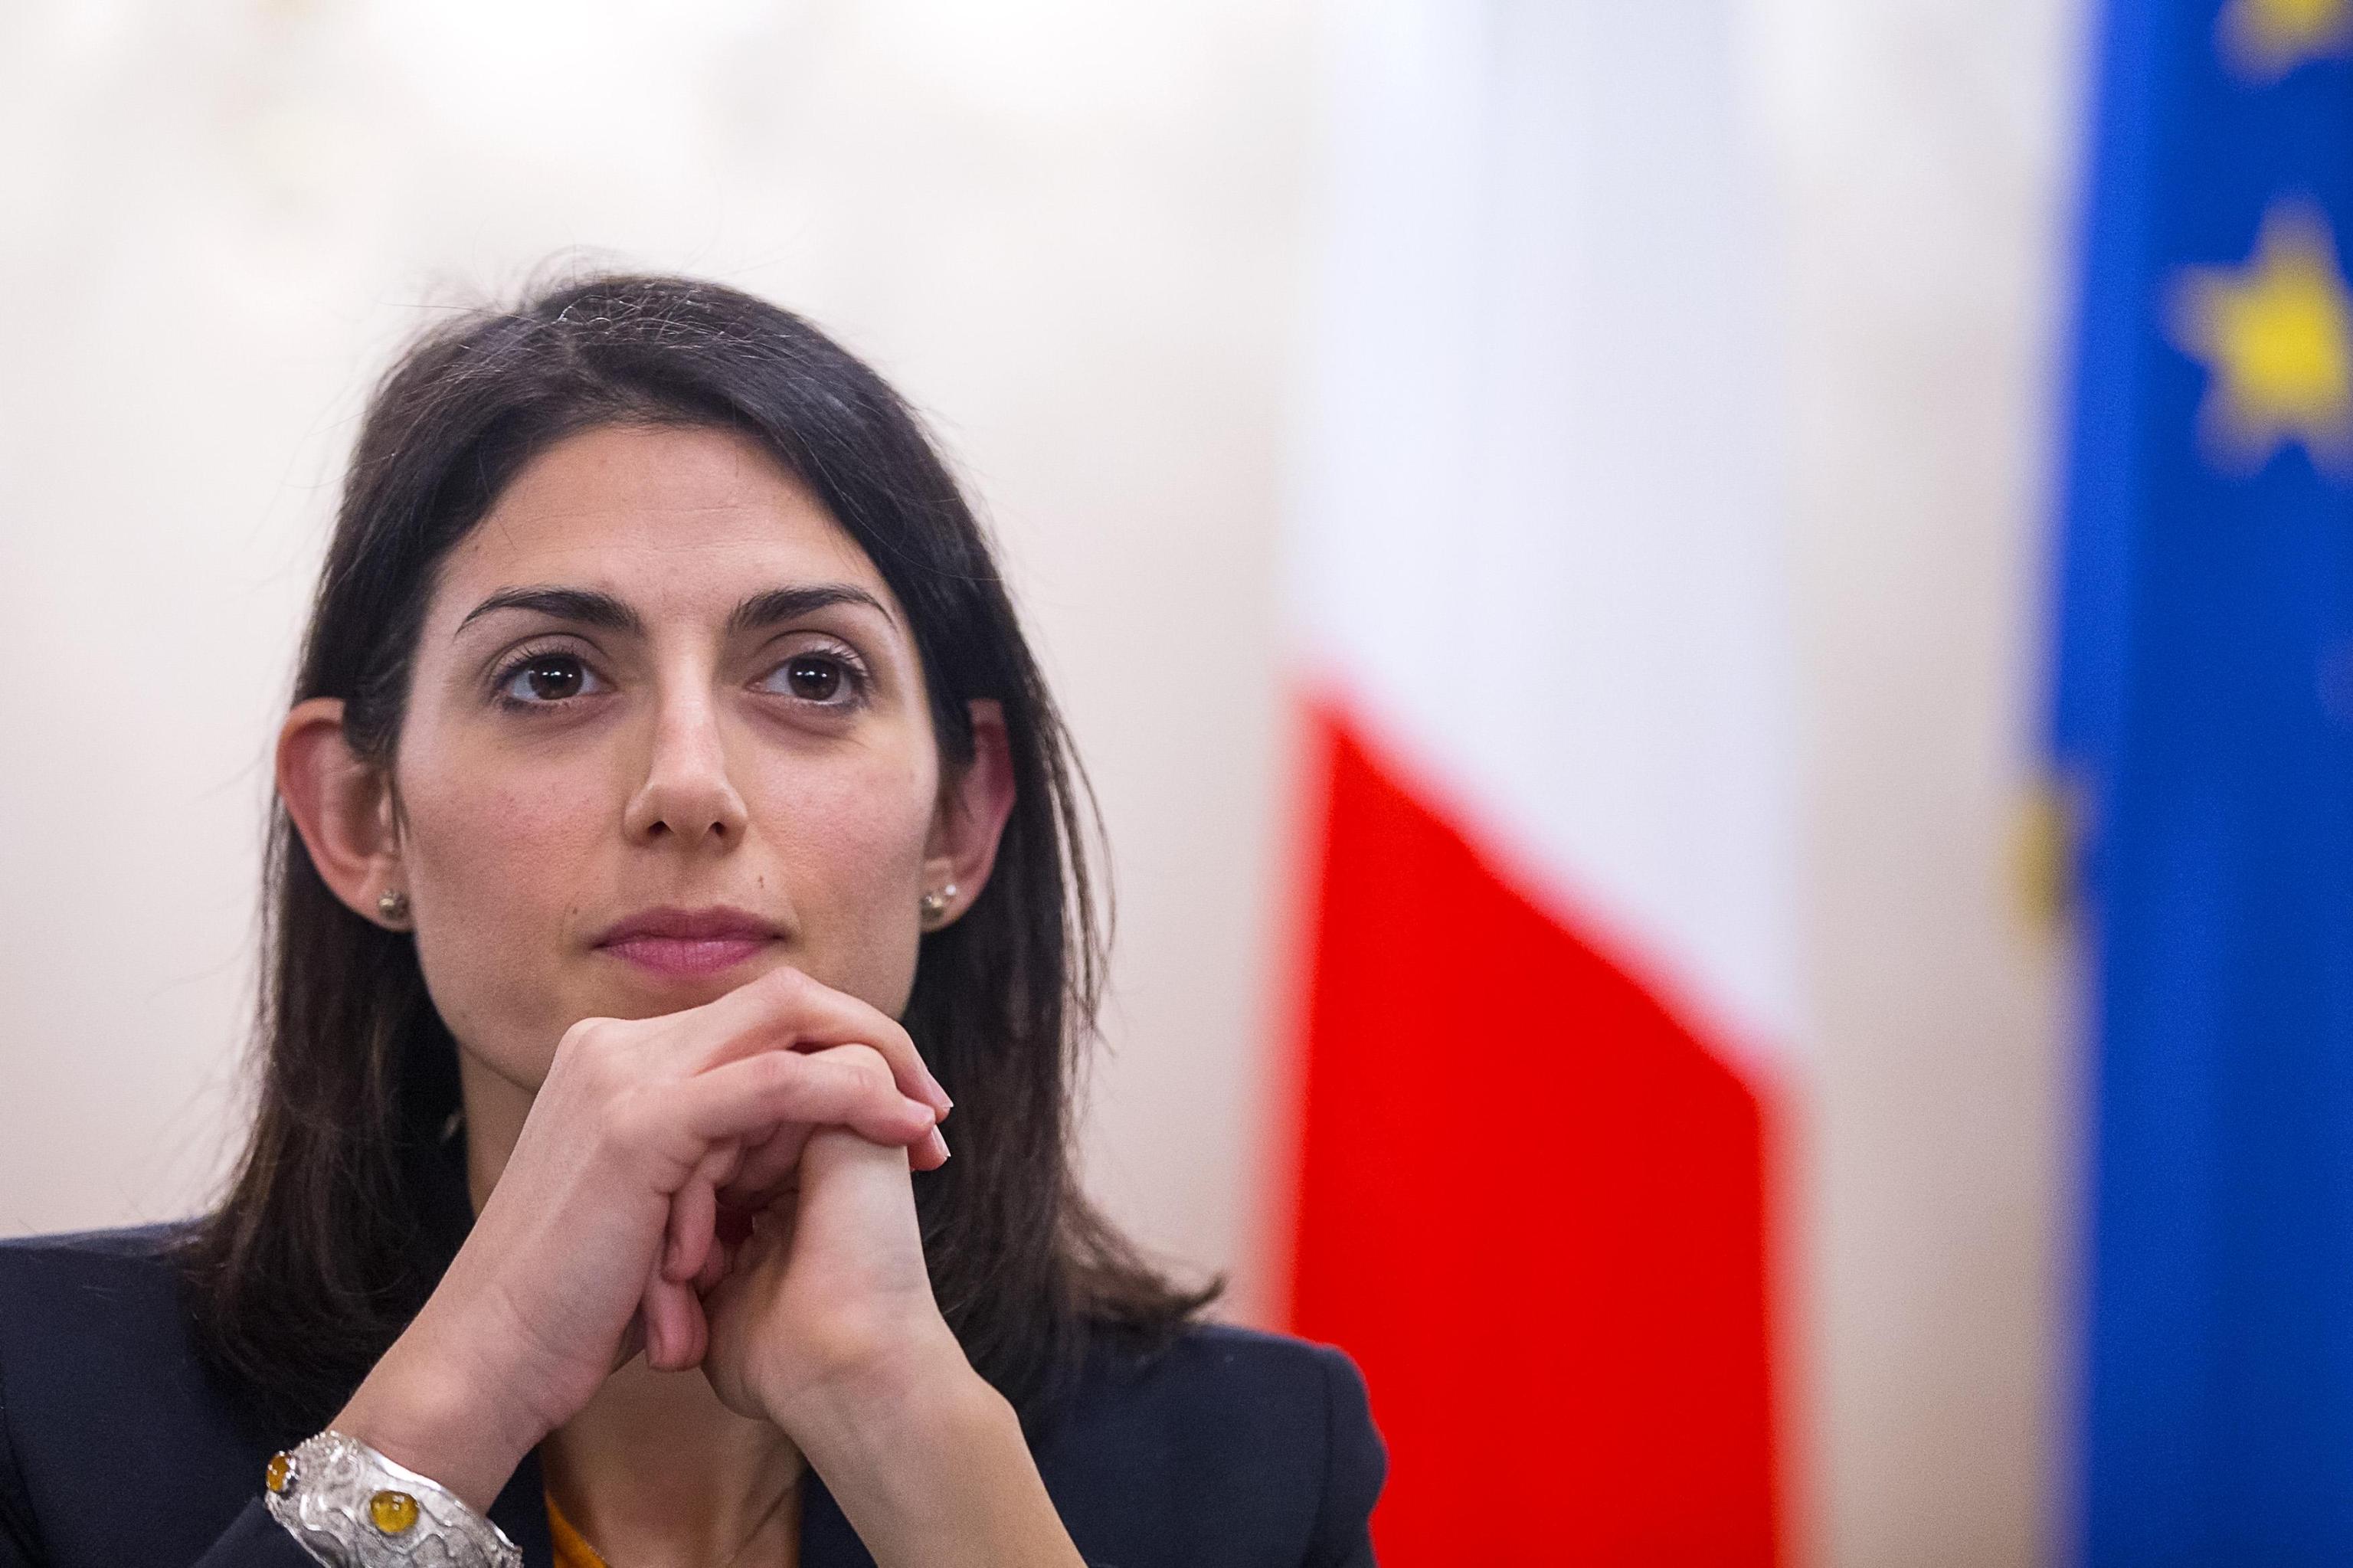 Rome's Mayor Virginia Raggi looks on during the press conference at the end of the meeting of the Provincial Committee for Public Order and Safety in Rome, Italy, 21 December 2016. ANSA/ANGELO CARCONI